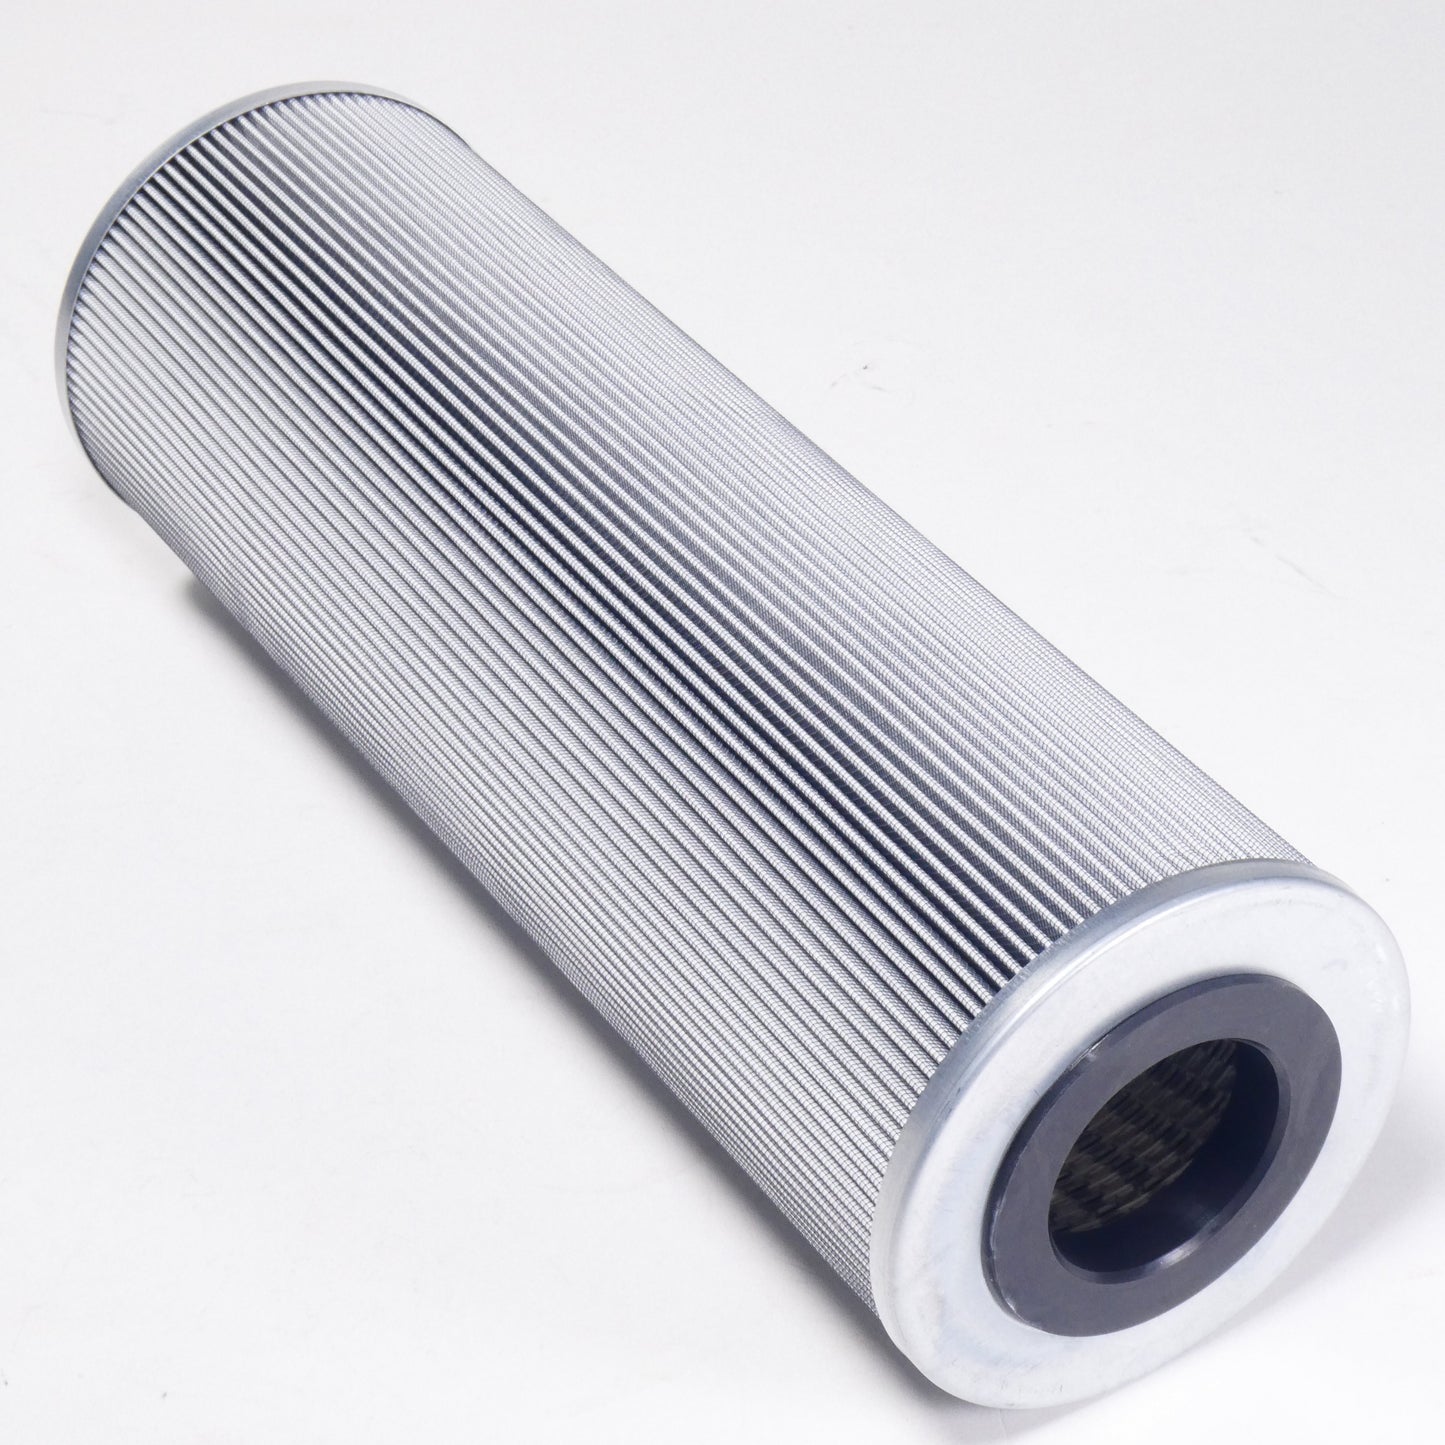 Hydrafil Replacement Filter Element for Hilco PL718-20-CN